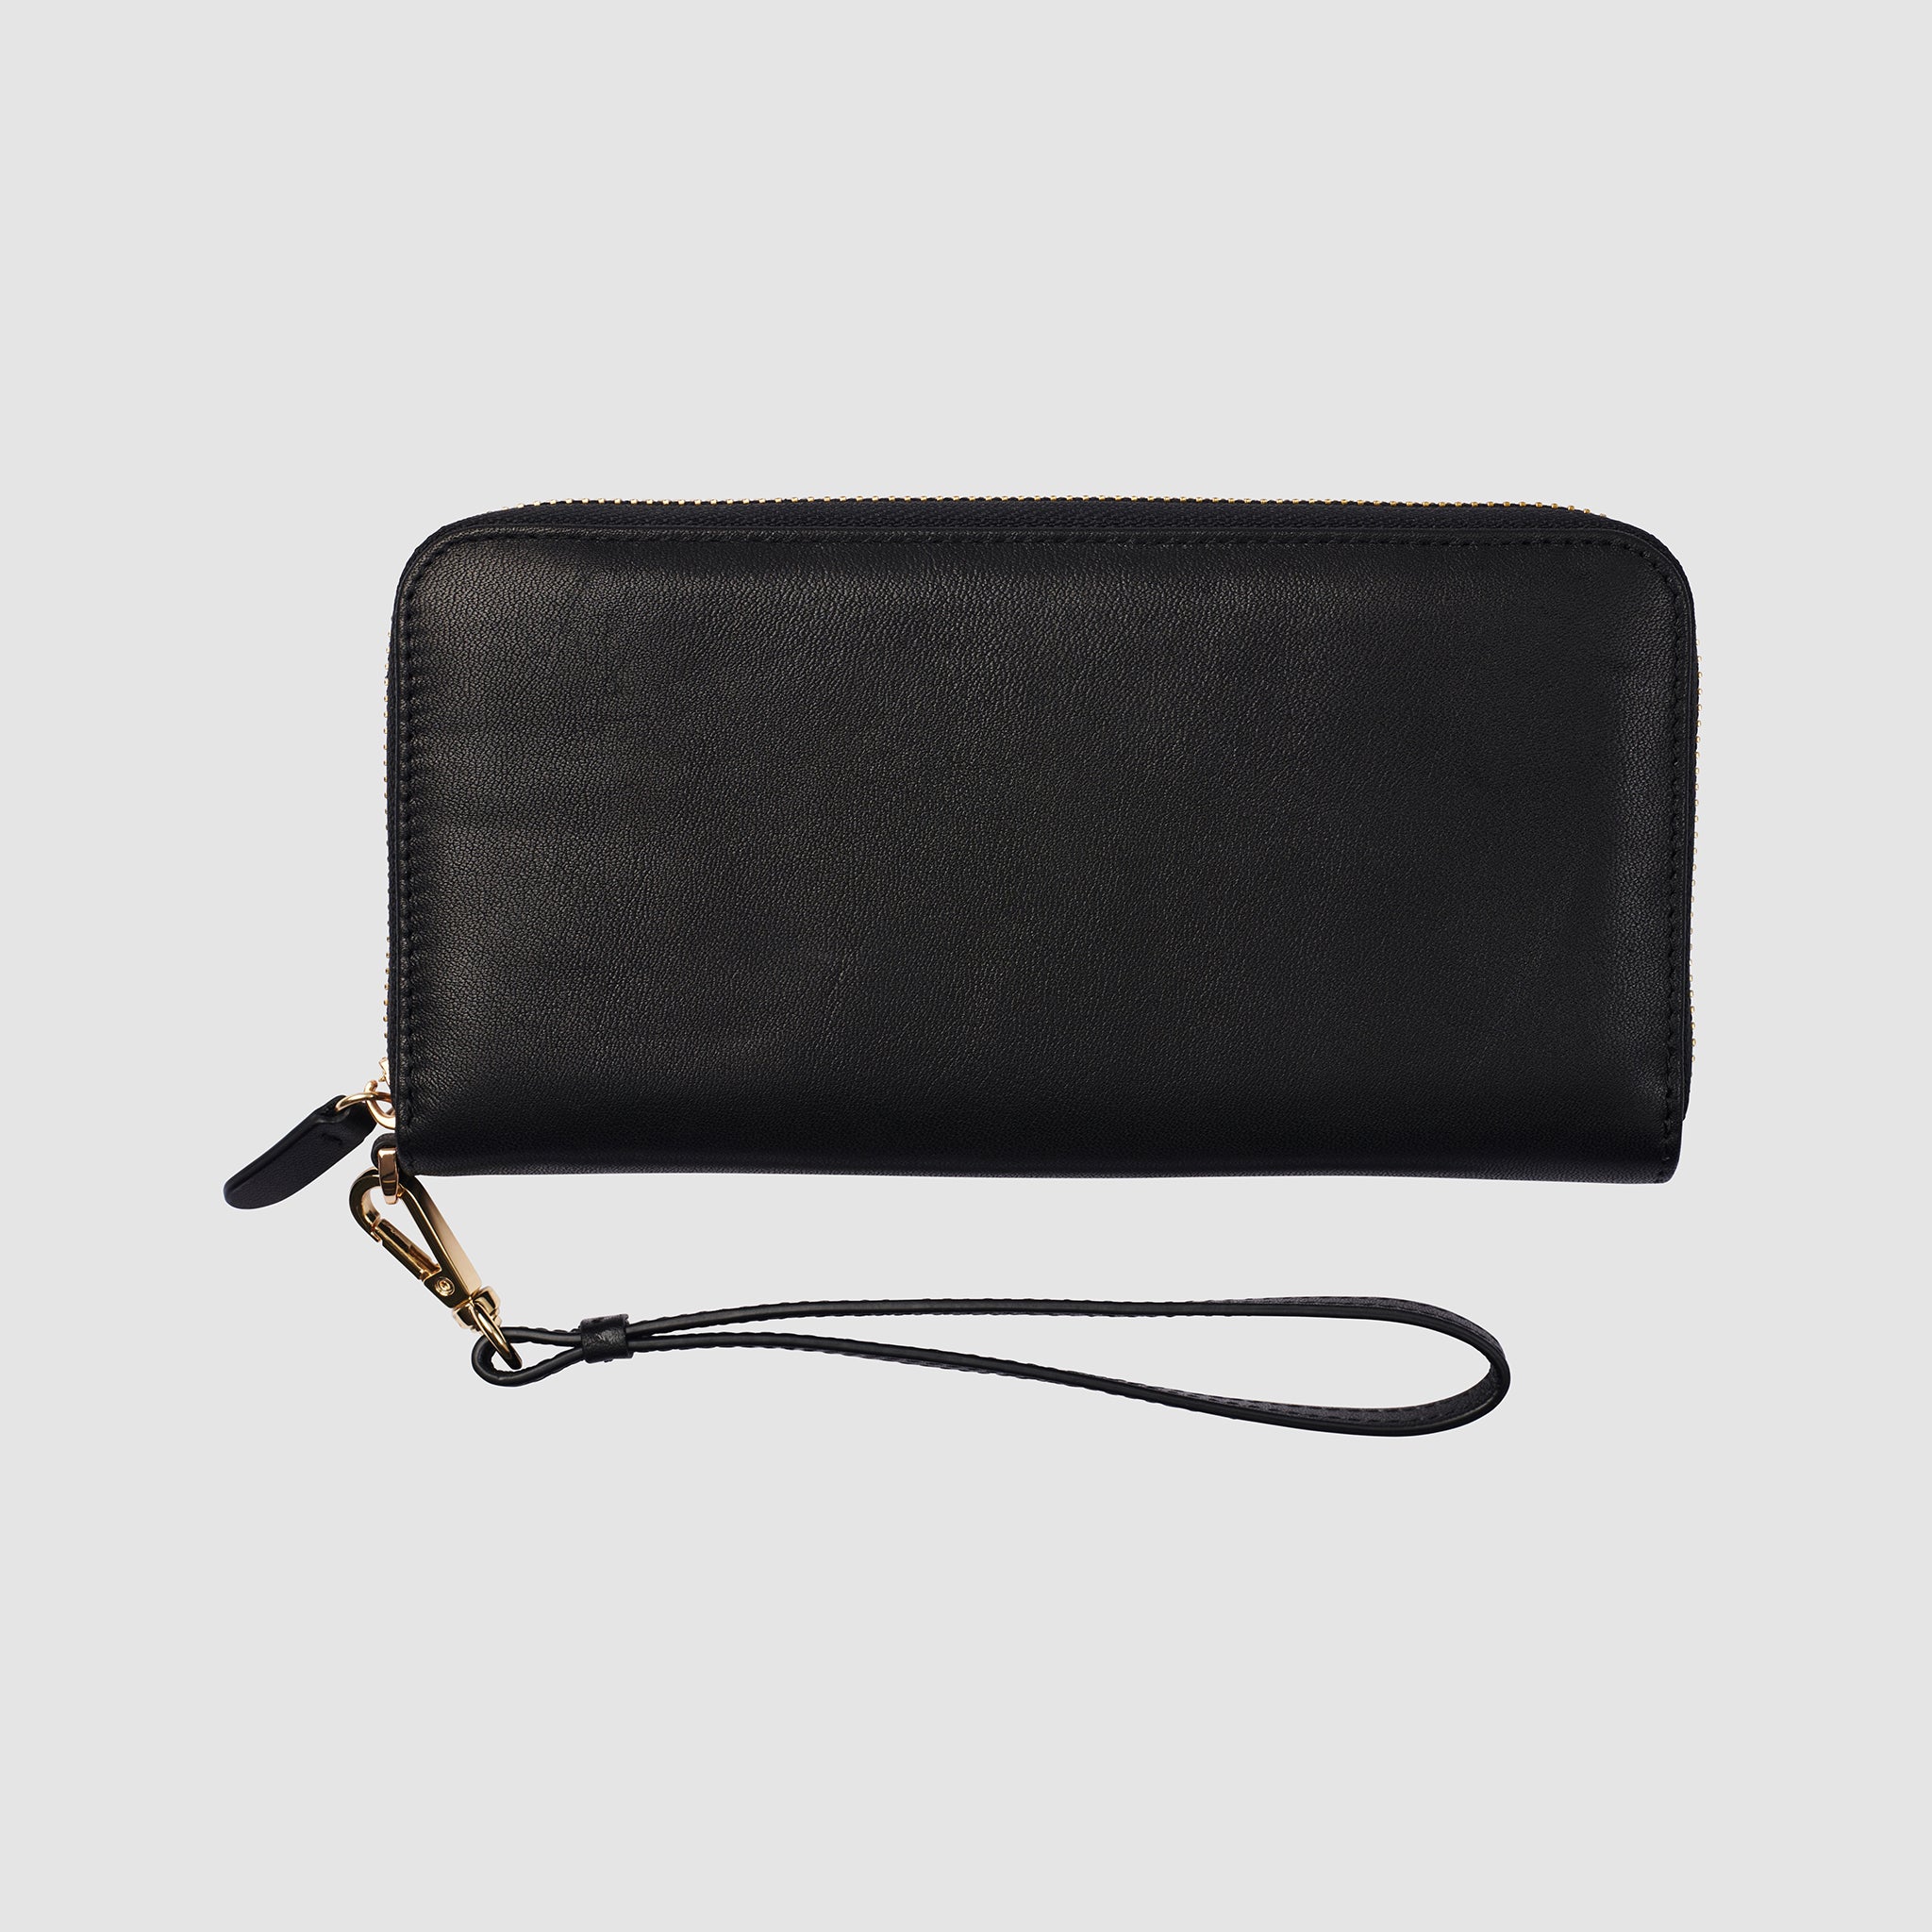 Personalised Crescent Continental Wallet Nappa Leather Black with ...